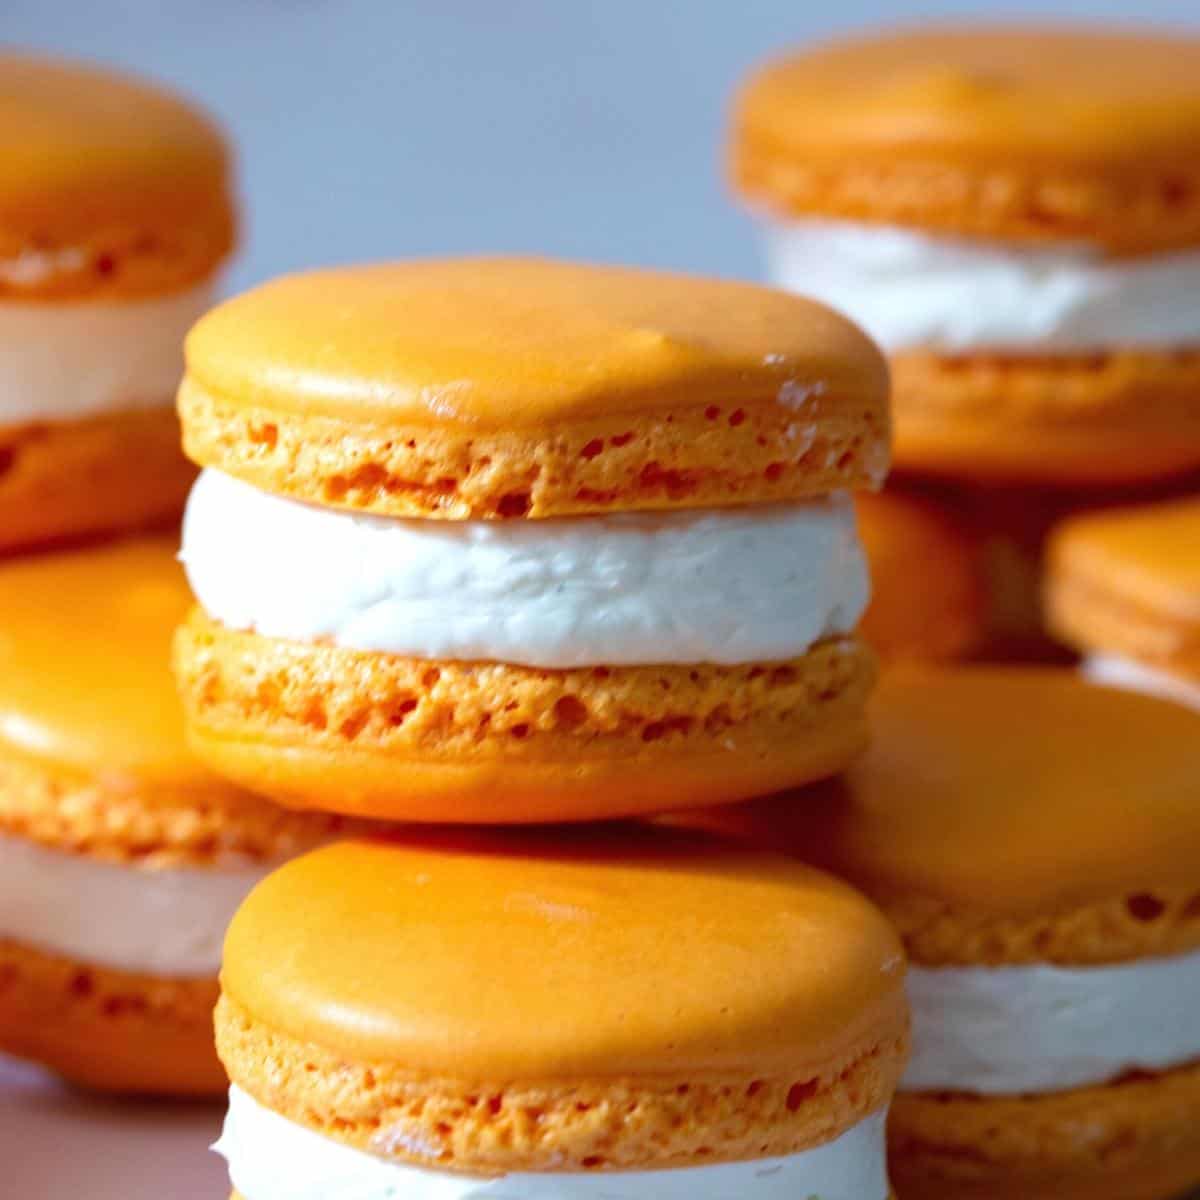 Orange flavored macarons on the table.